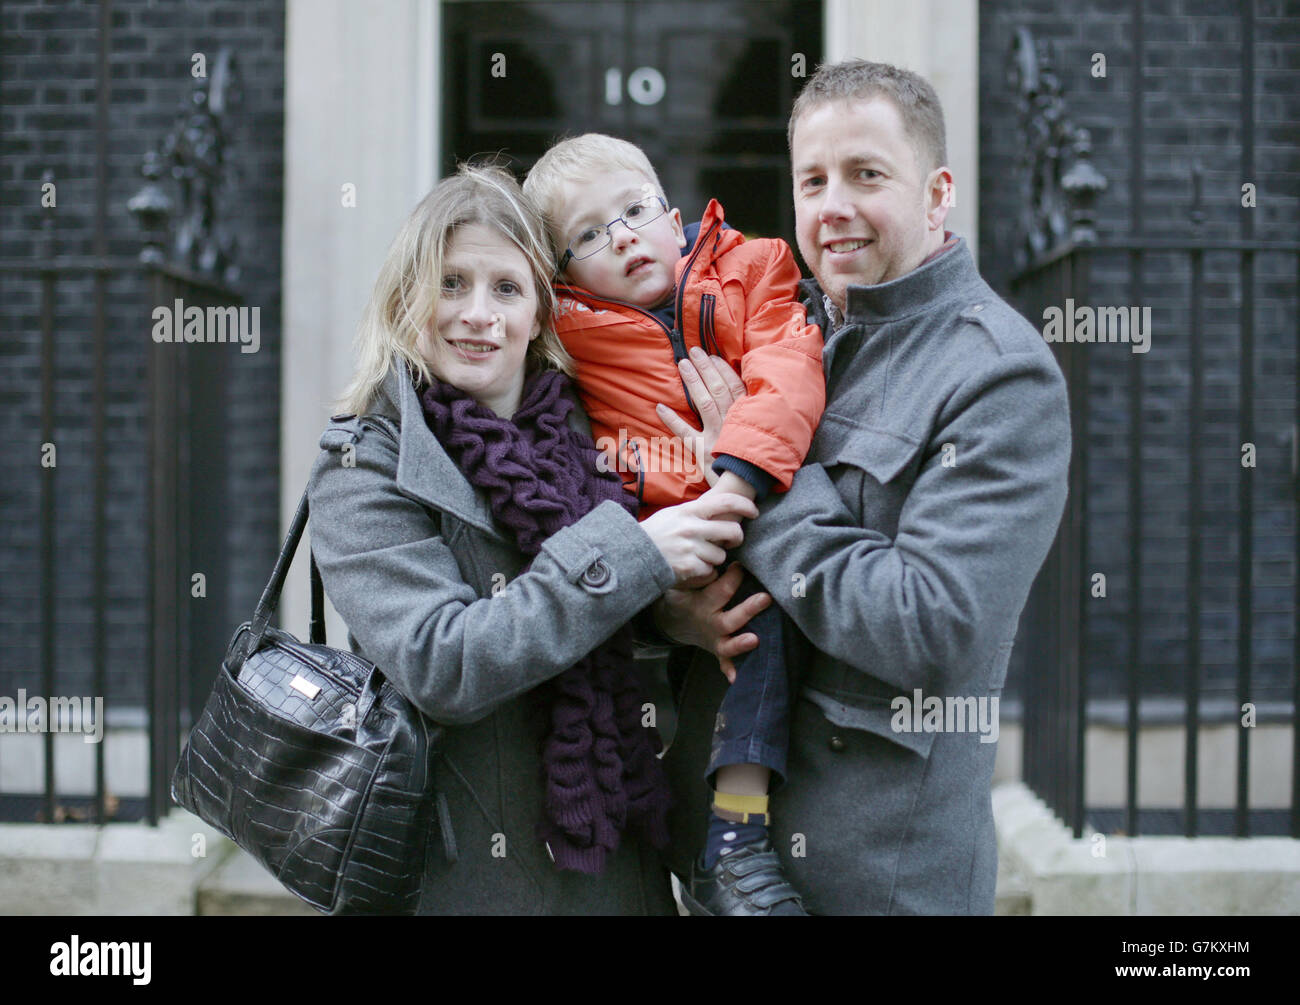 Six year-old Sam Brown, of Otley, West Yorkshire - who is one of just 88 people in the UK with the ultra-rare condition Morquio Syndrome - with his parents Simon and Katy handing in a letter at 10 Downing Street, London, calling on the Prime Minister to take urgent action to fund the drugs he needs, as the drug company BioMarin stated that it will cease supplying his drugs, and NHS England uncertain to fund the drugs. Stock Photo